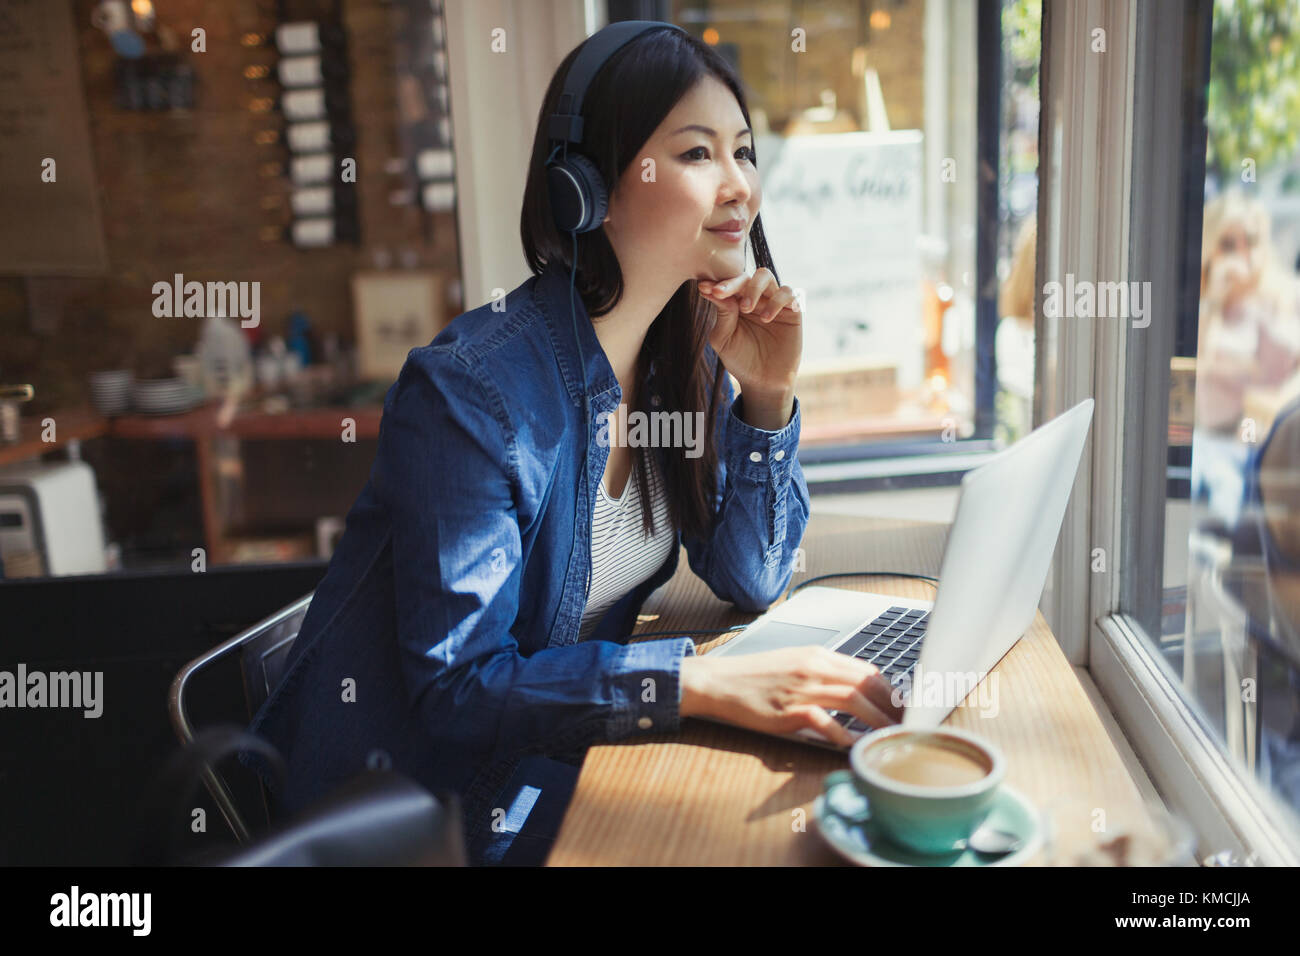 Pensive young woman listening to music with headphones at laptop and drinking coffee in cafe window Stock Photo